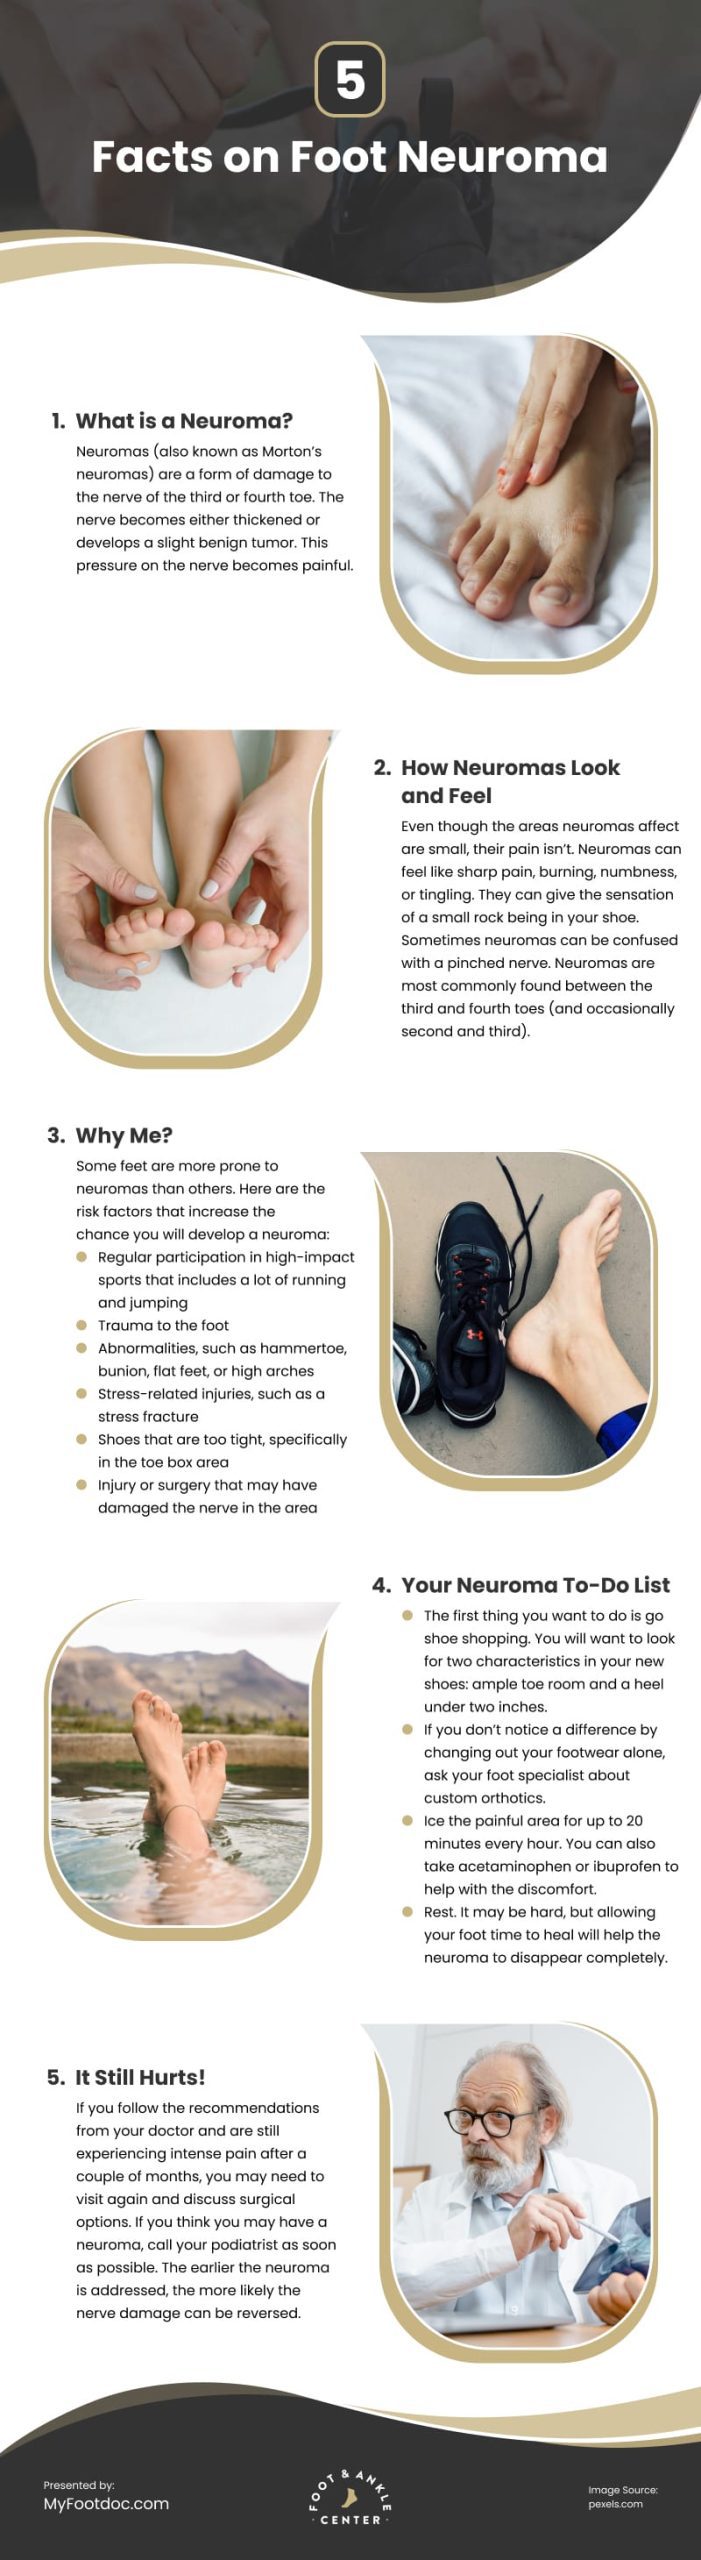 5 Facts on Foot Neuroma Infographic